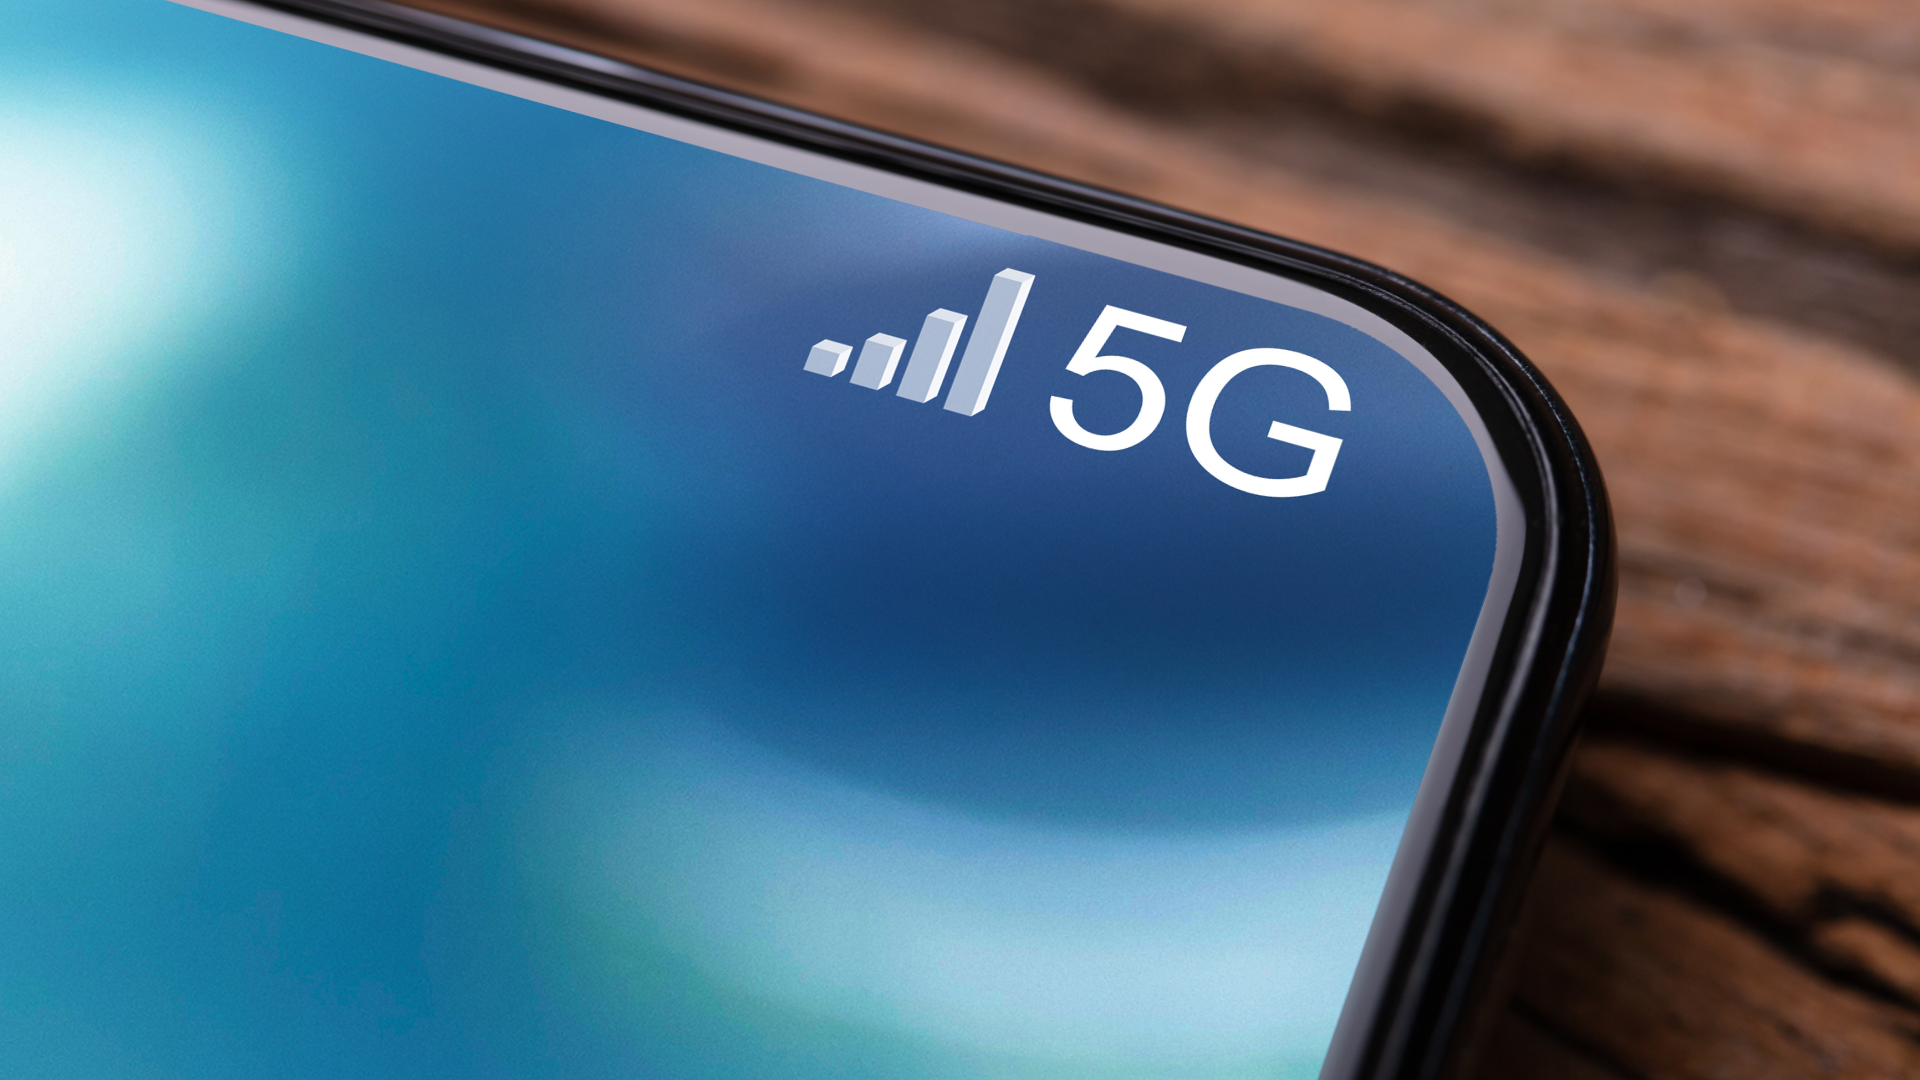 Mobile device connected to 5G network